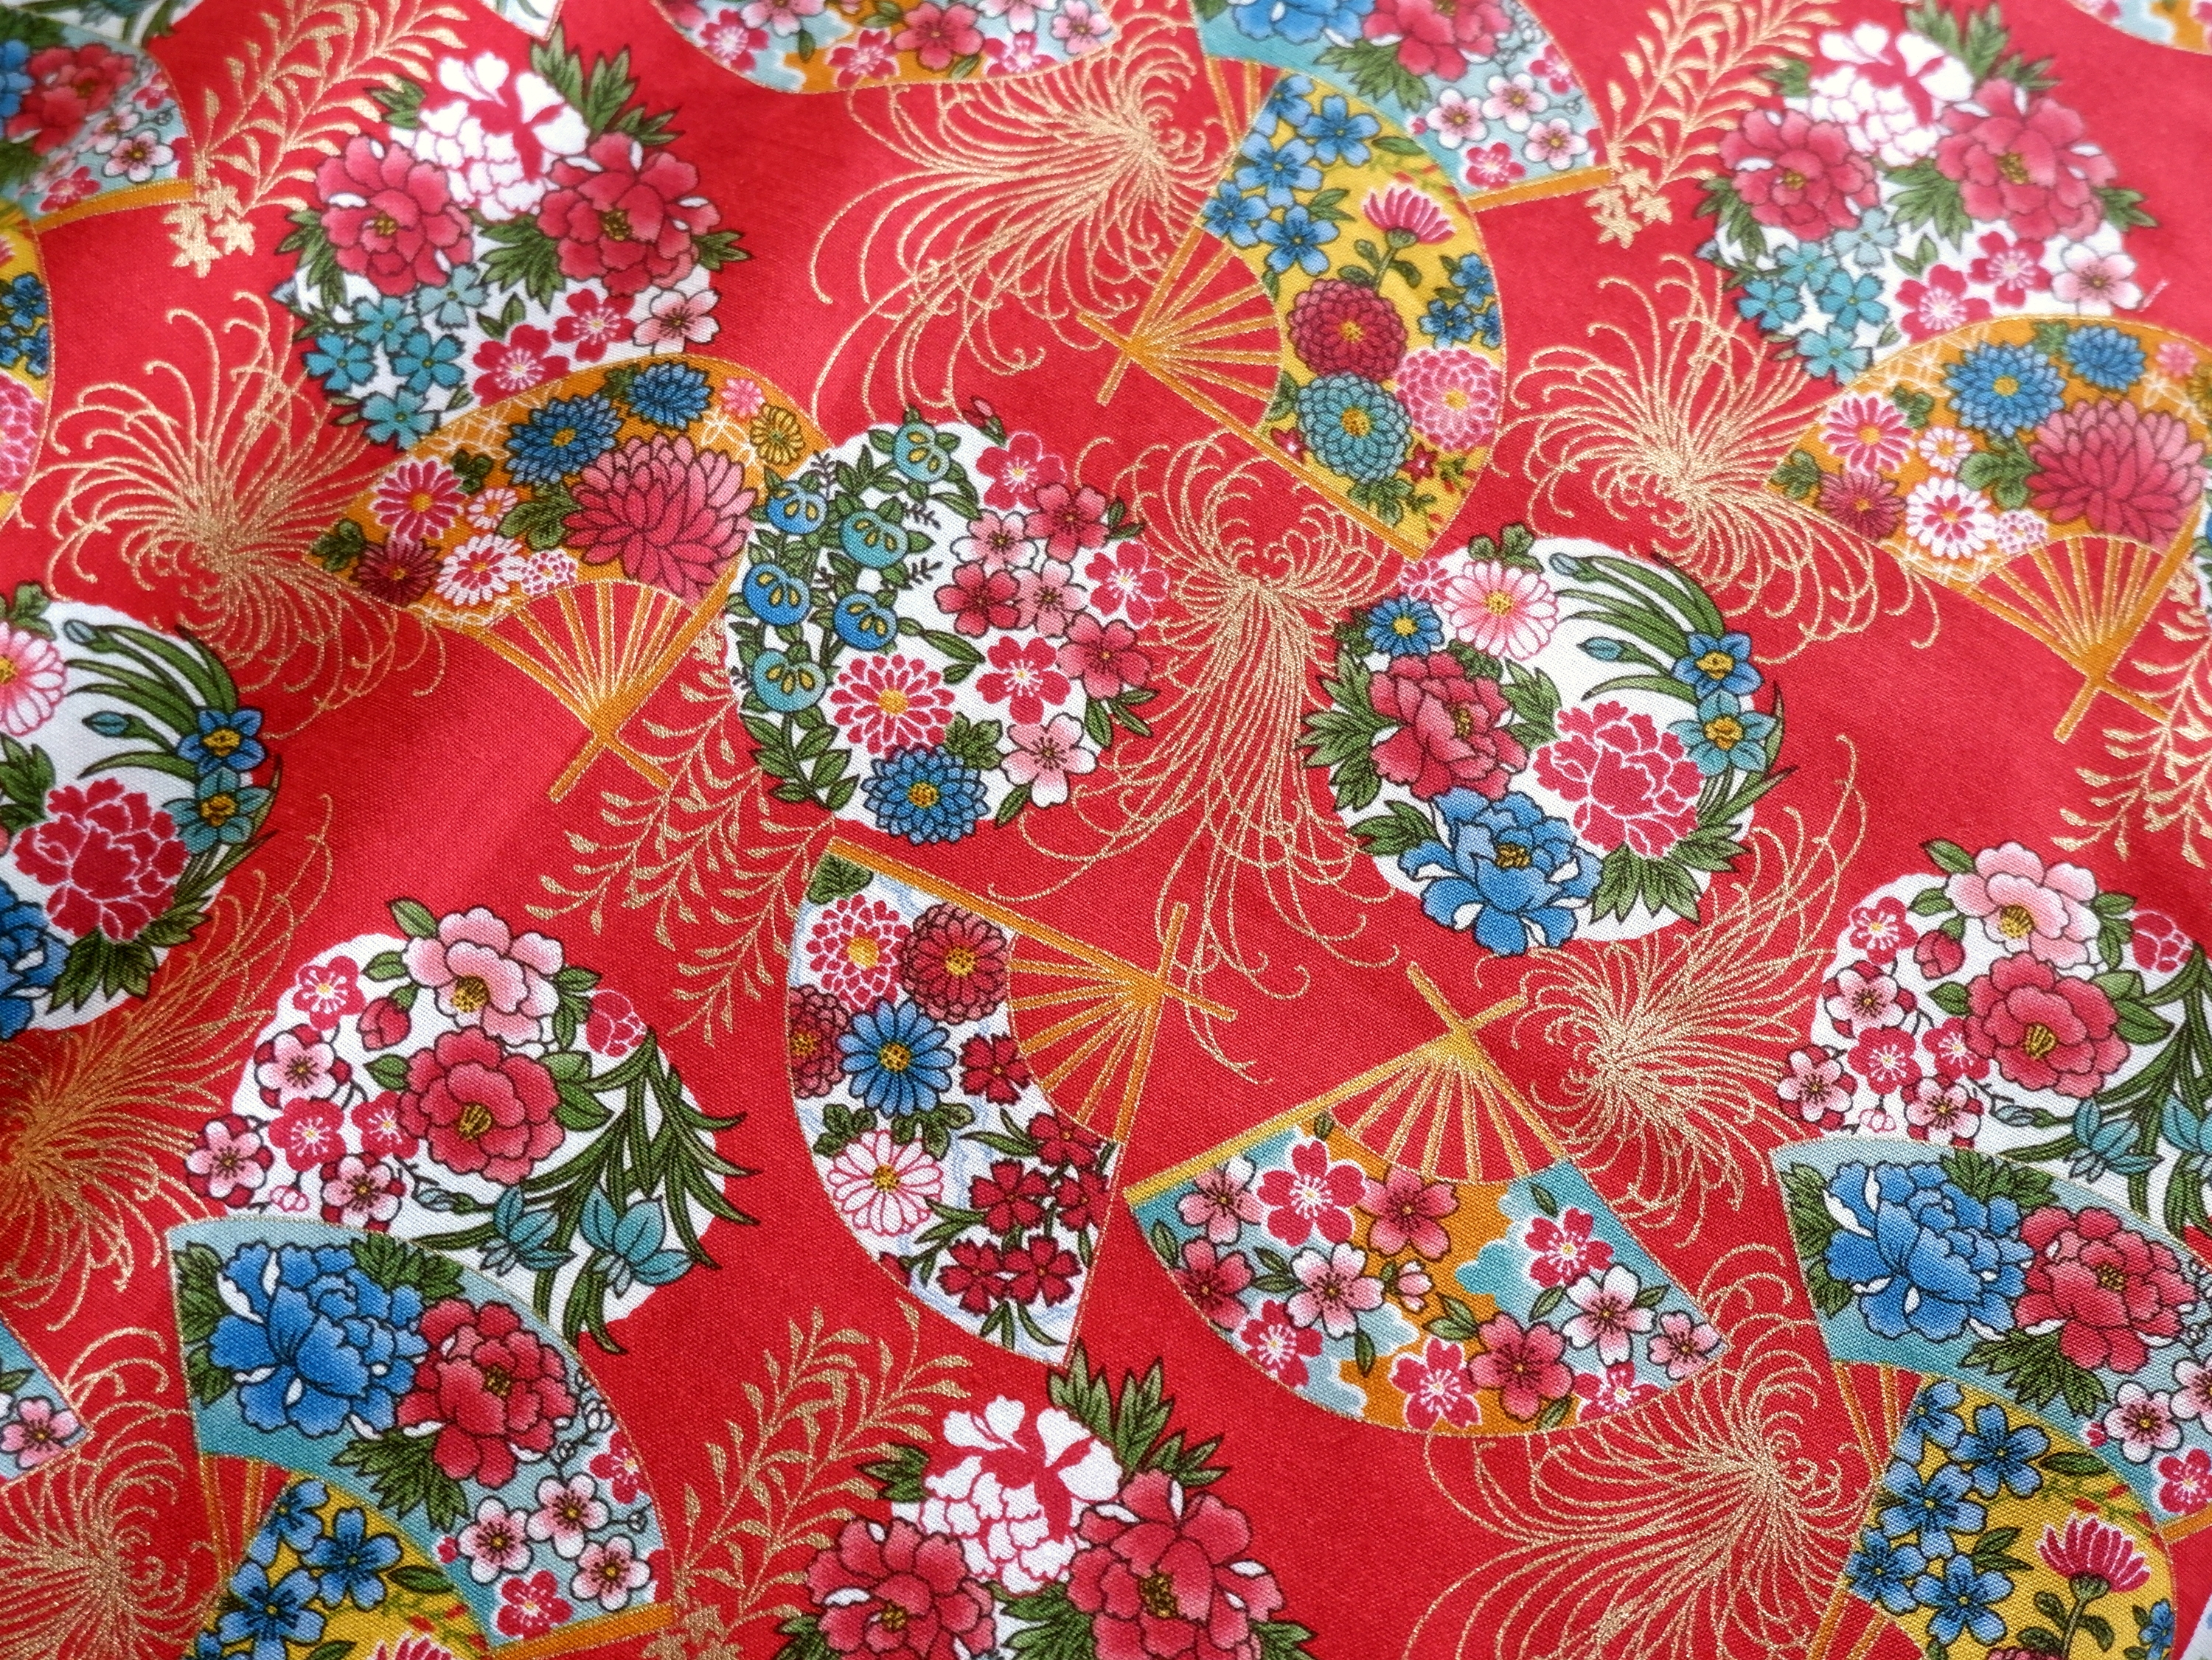 1134BR-D Gold Chrysanthemum floral holding fan japan chiyogami fabric(Sevenberry)